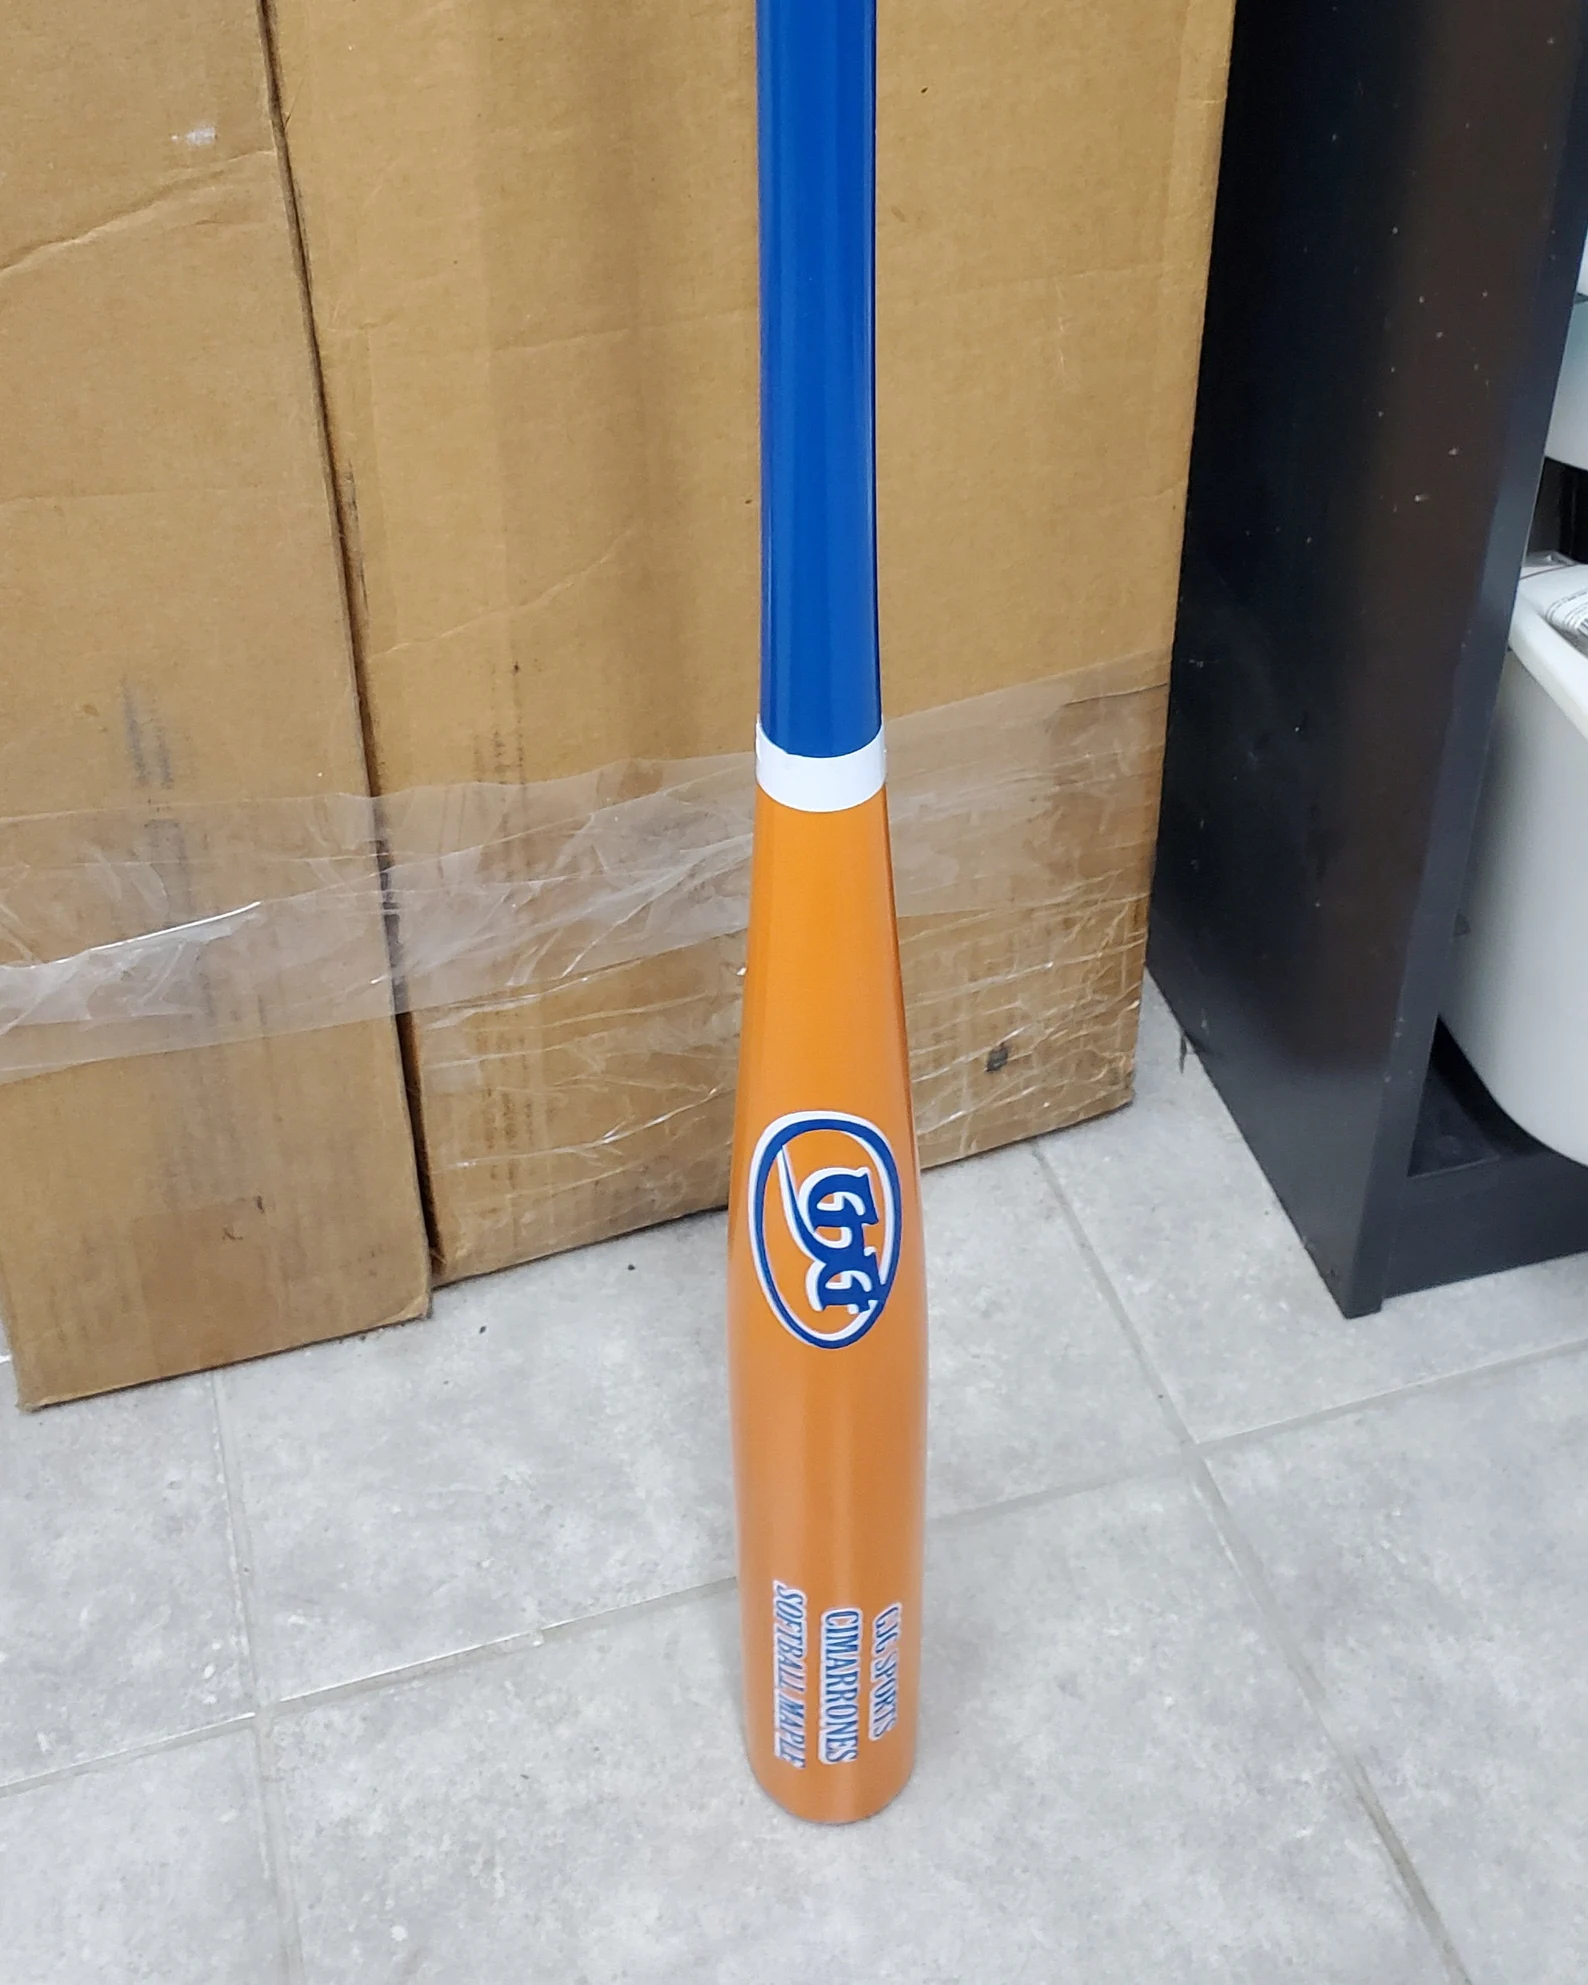 GJG Sports on Etsy offers engraving and customization options for softball and baseball bats. Like this Orange and blue bat.